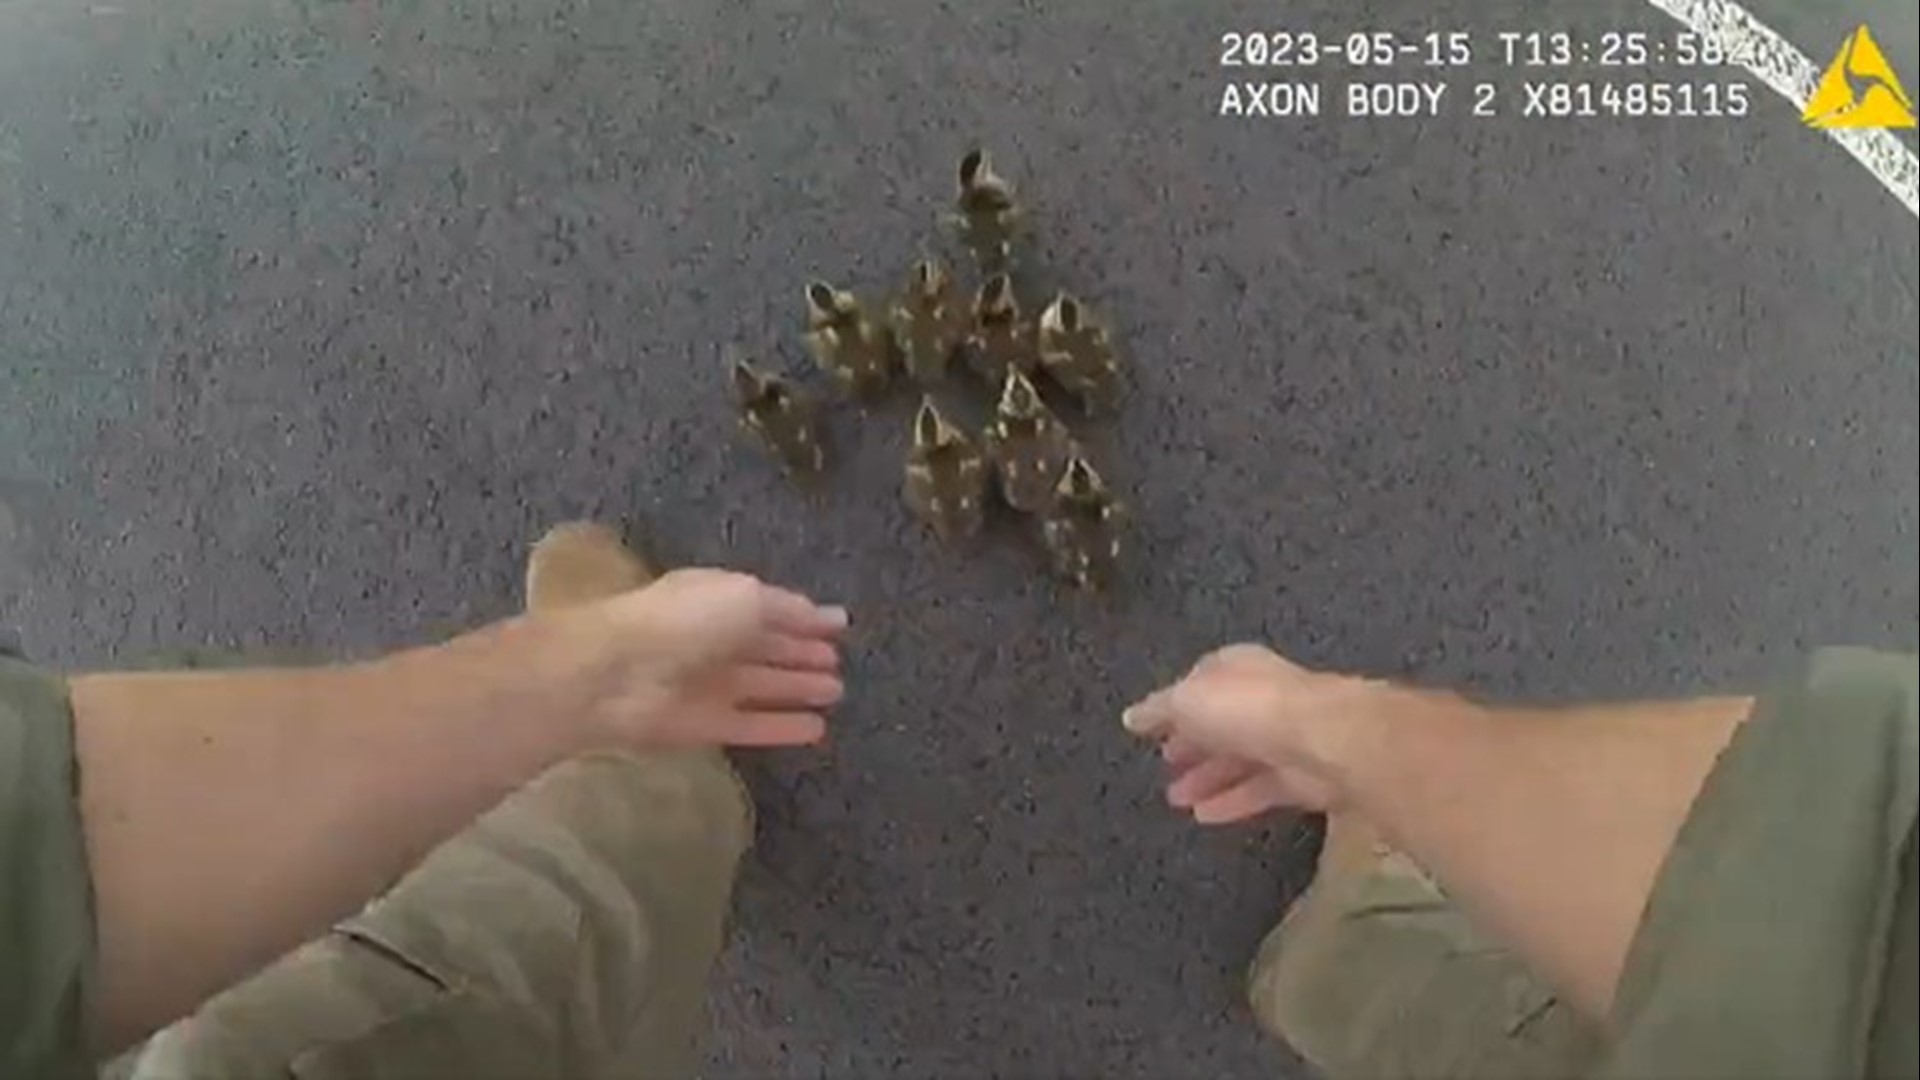 Officials from three agencies worked together to help a family of ducklings make their way across a roadway in Fairfax County.